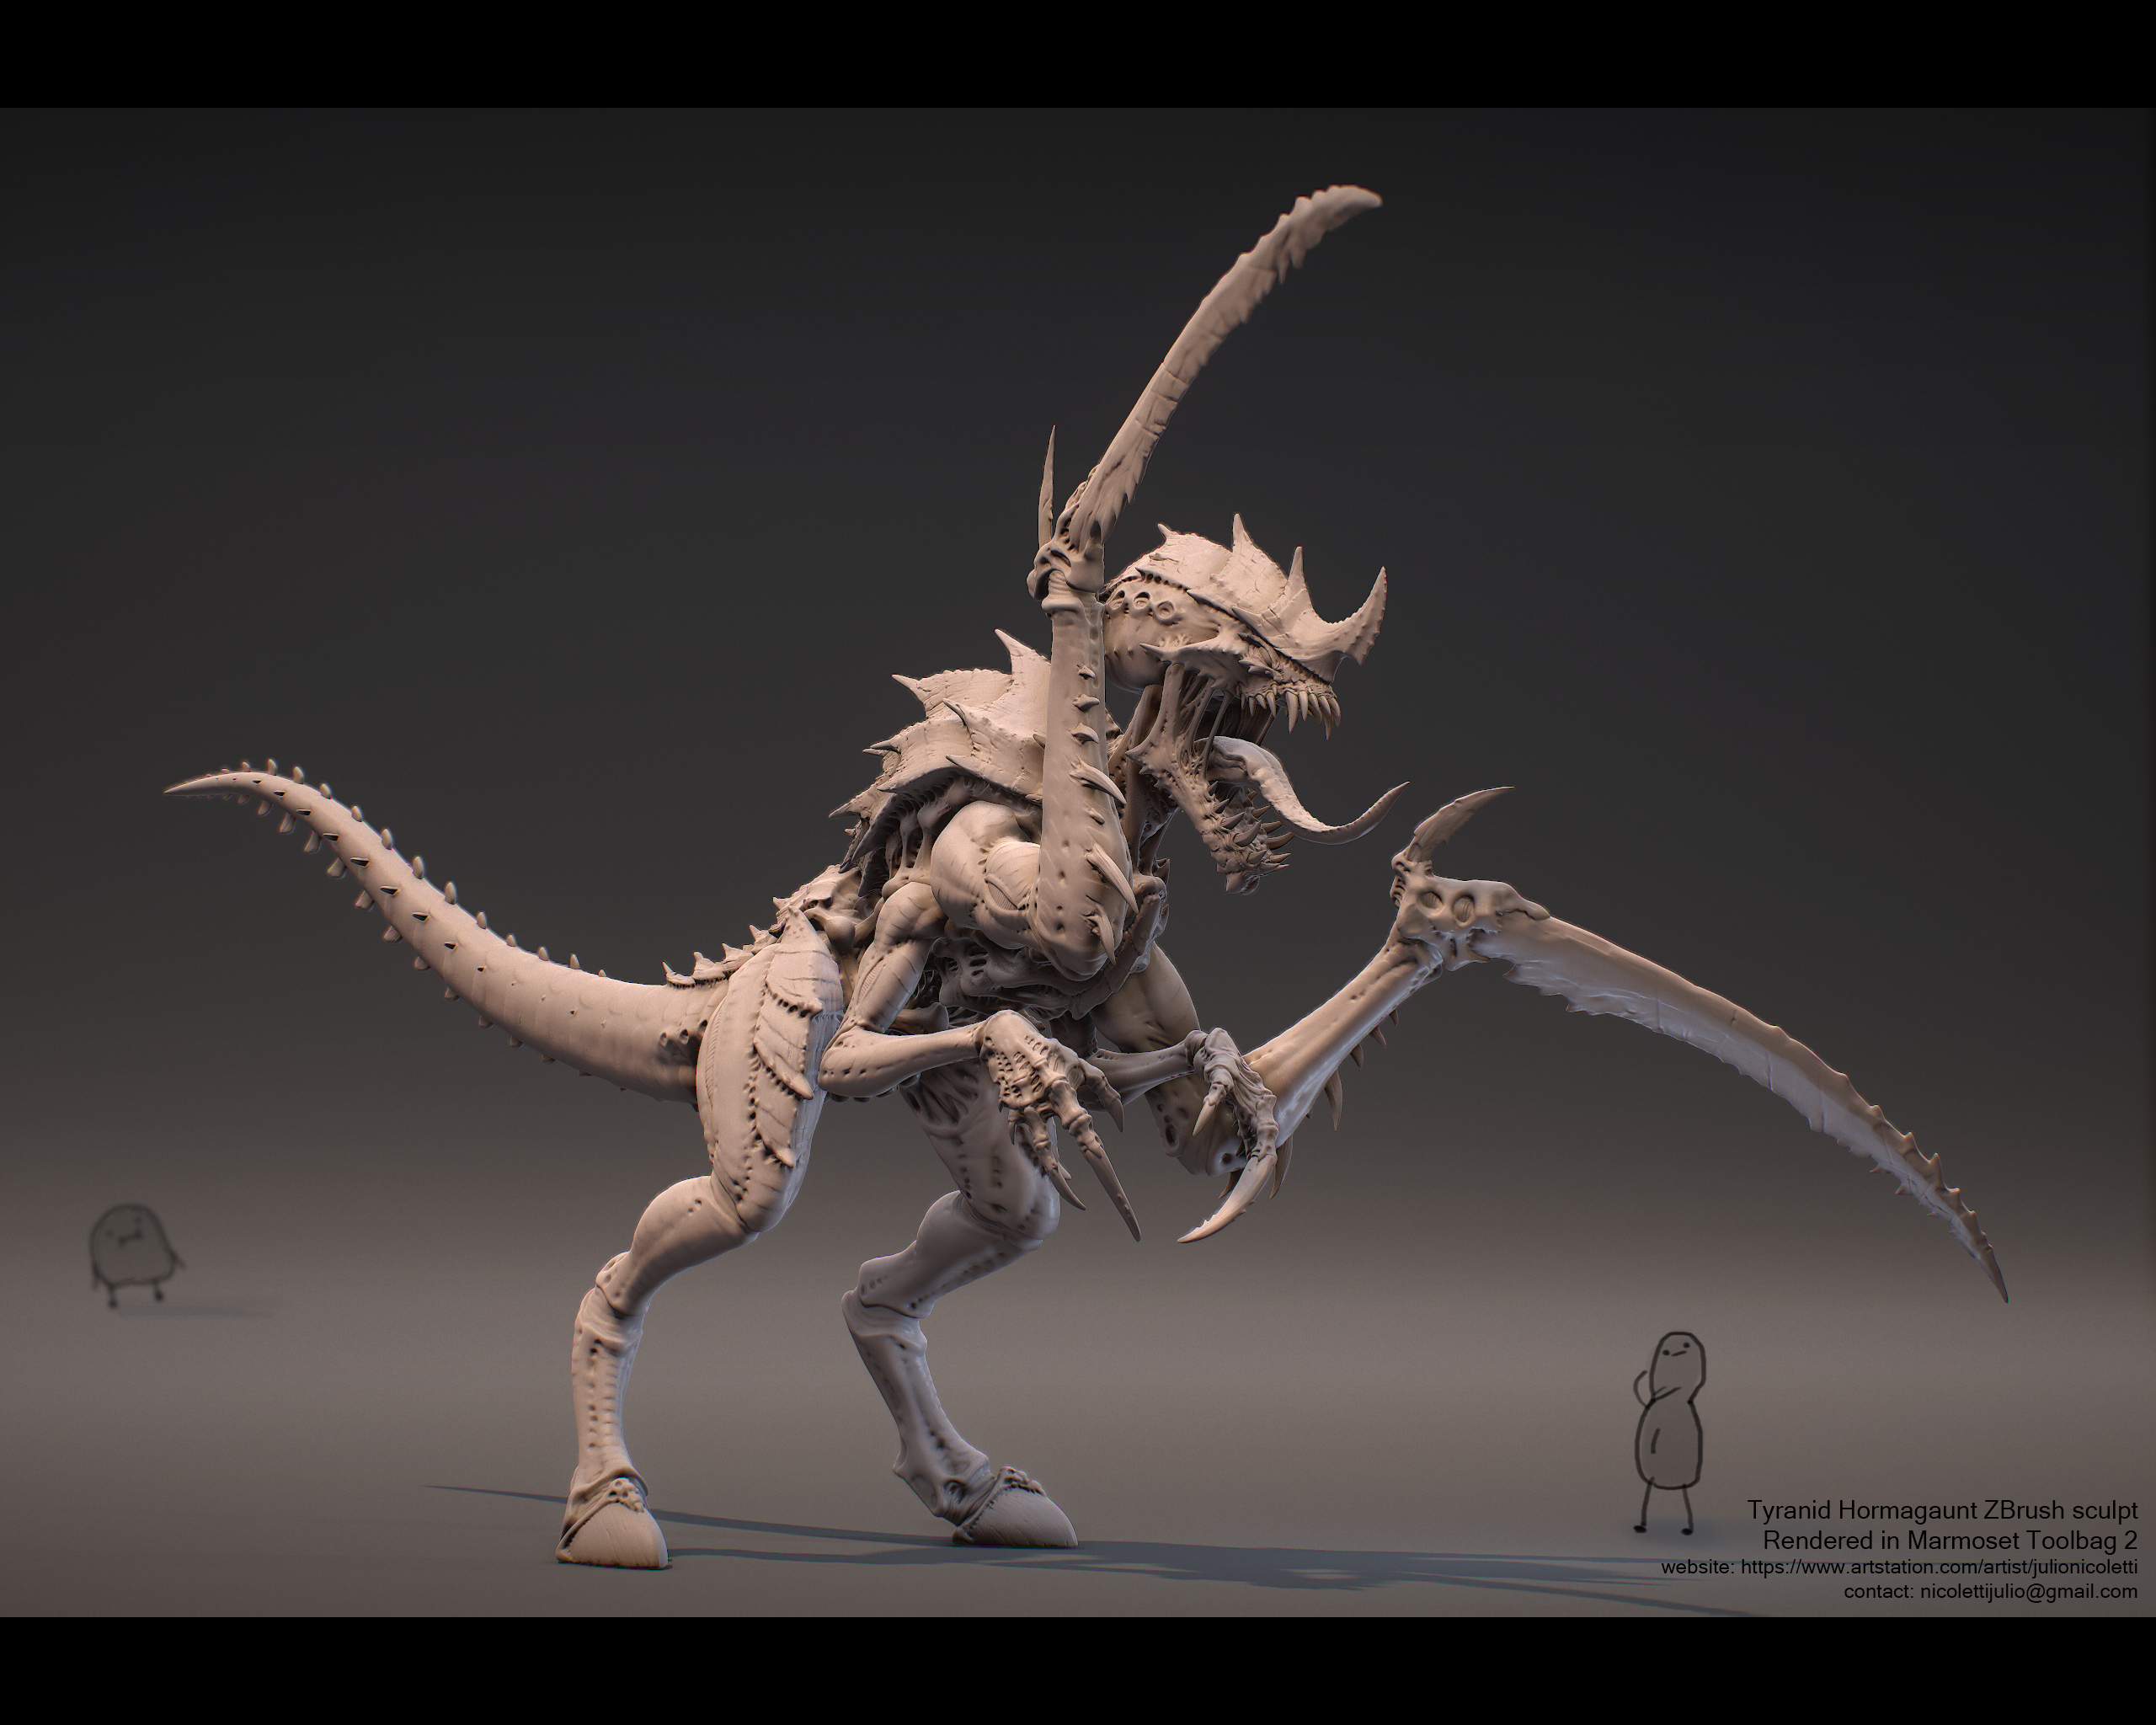 tyranid_hormagaunt_by_julionicoletti-d9eaj94.png